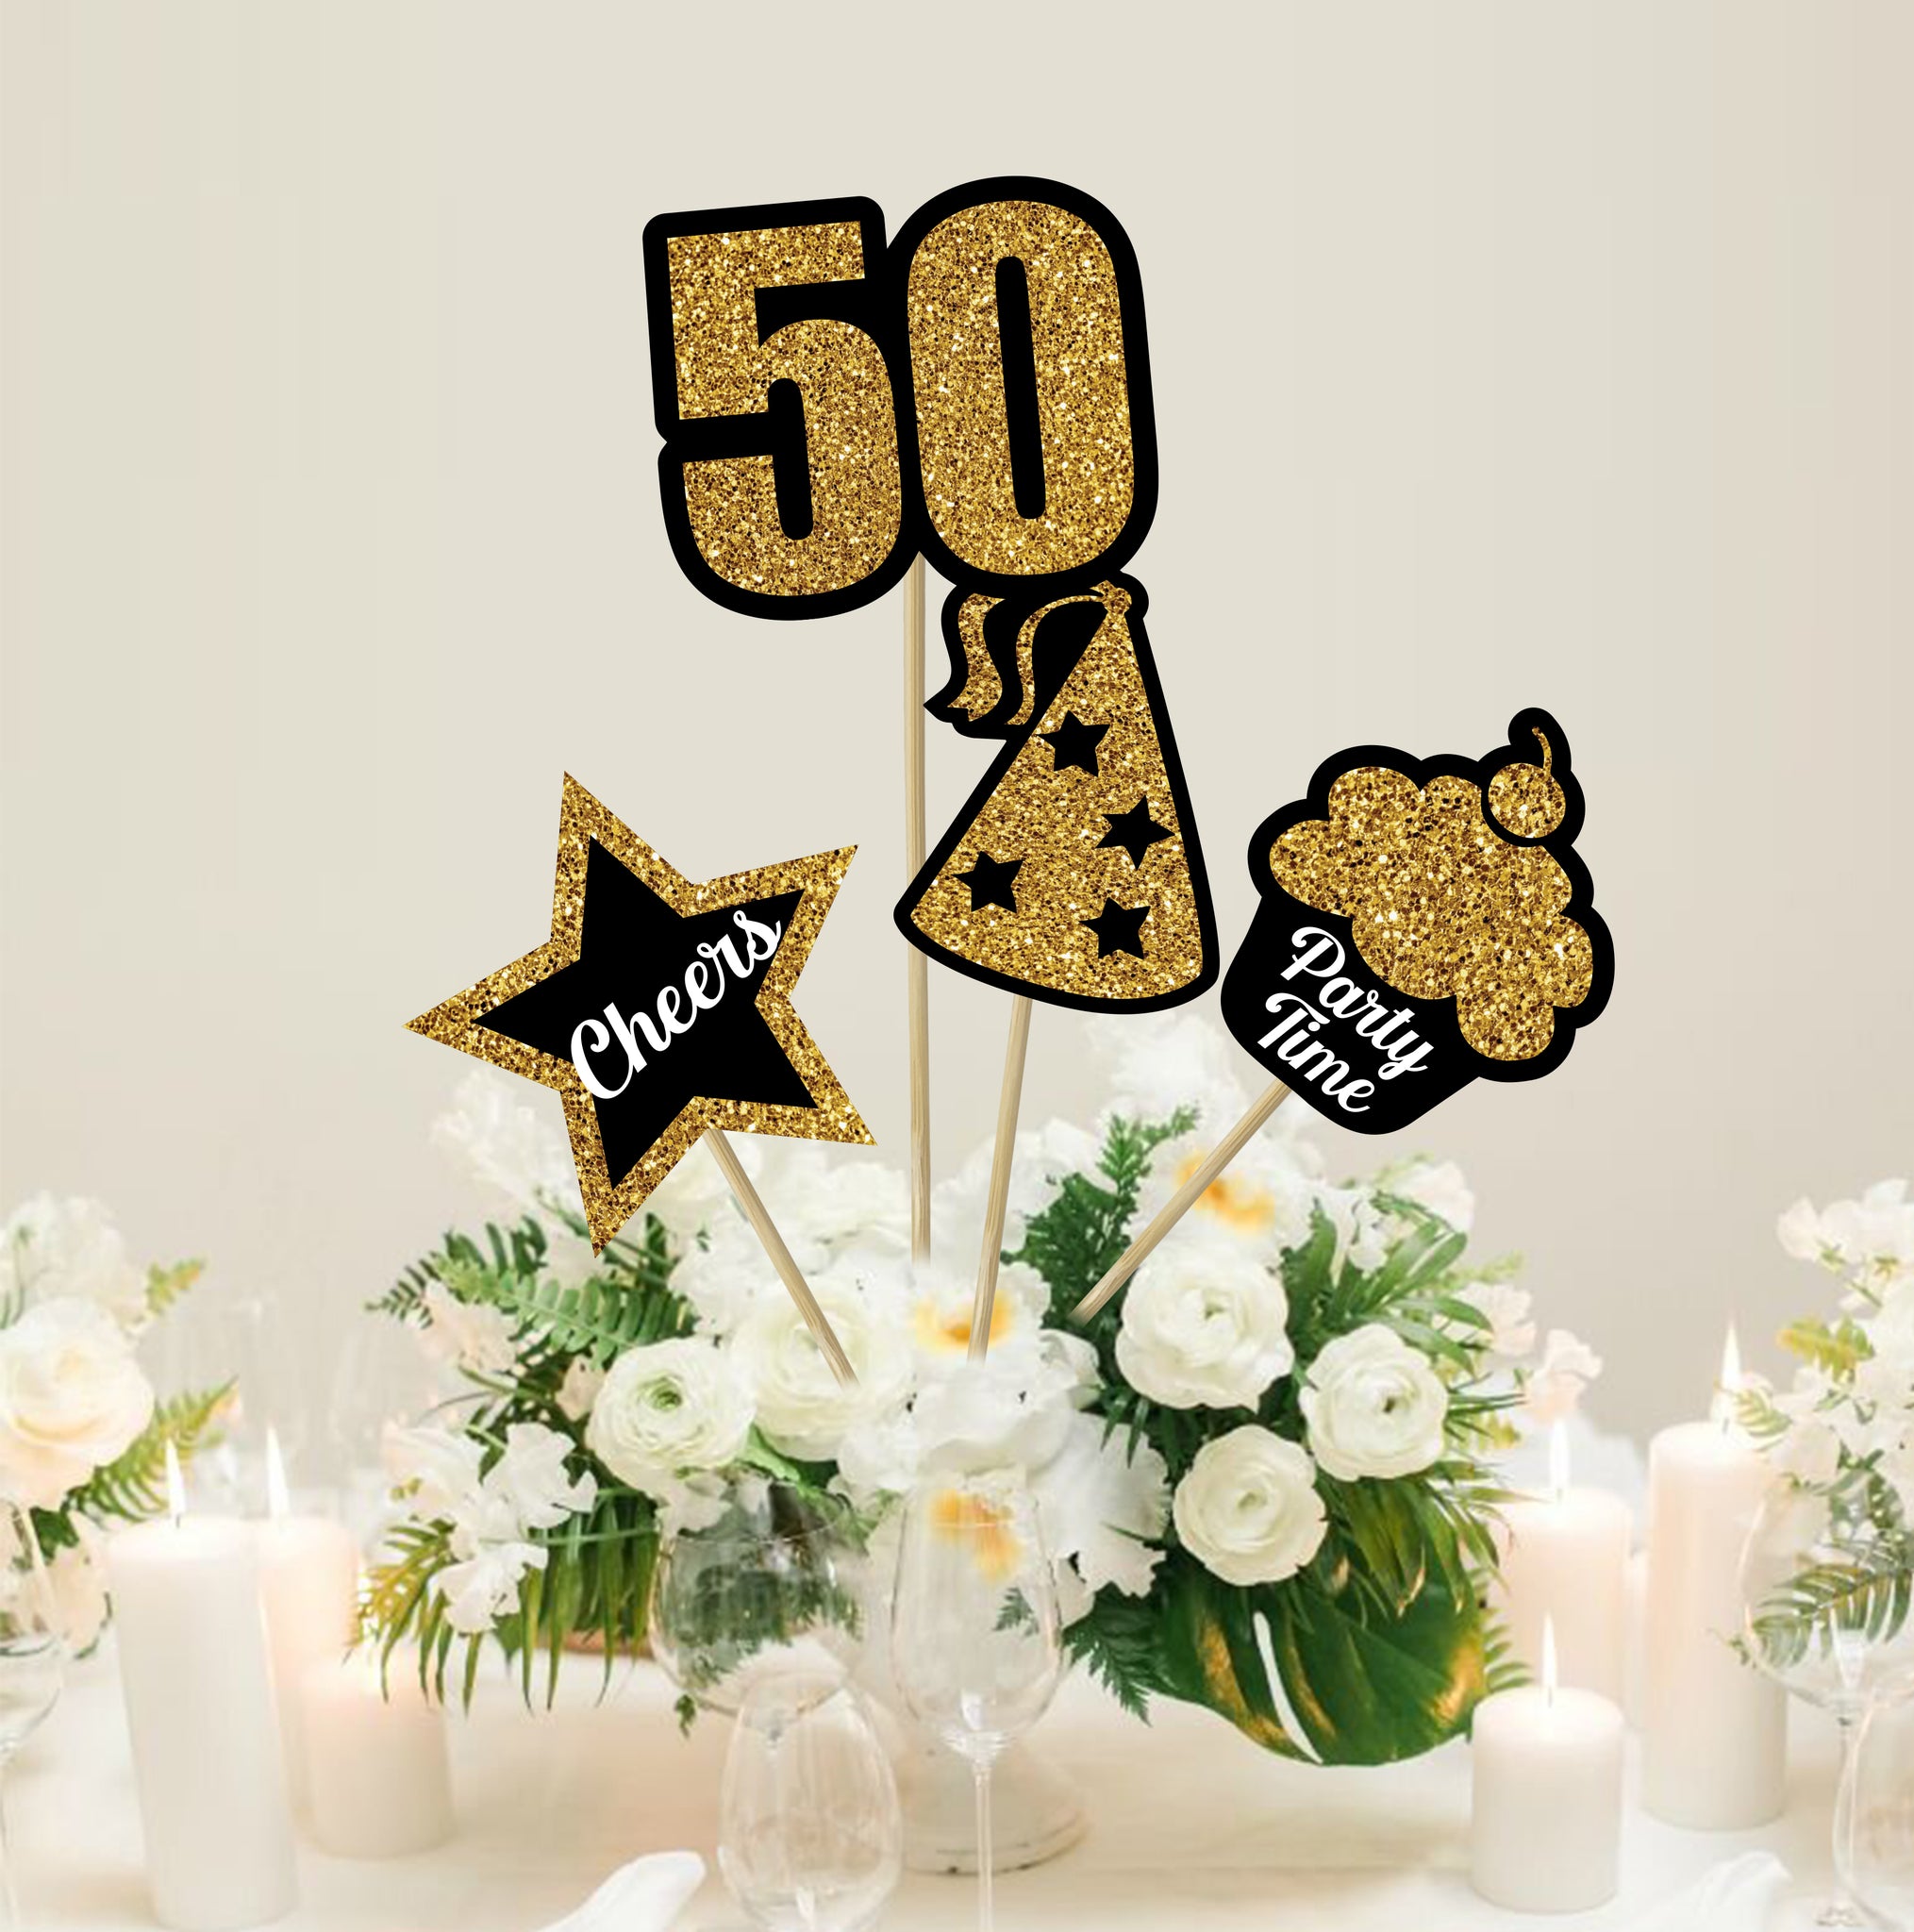 Birthday Theme Party Table Decorations | Centerpieces for 50th ...